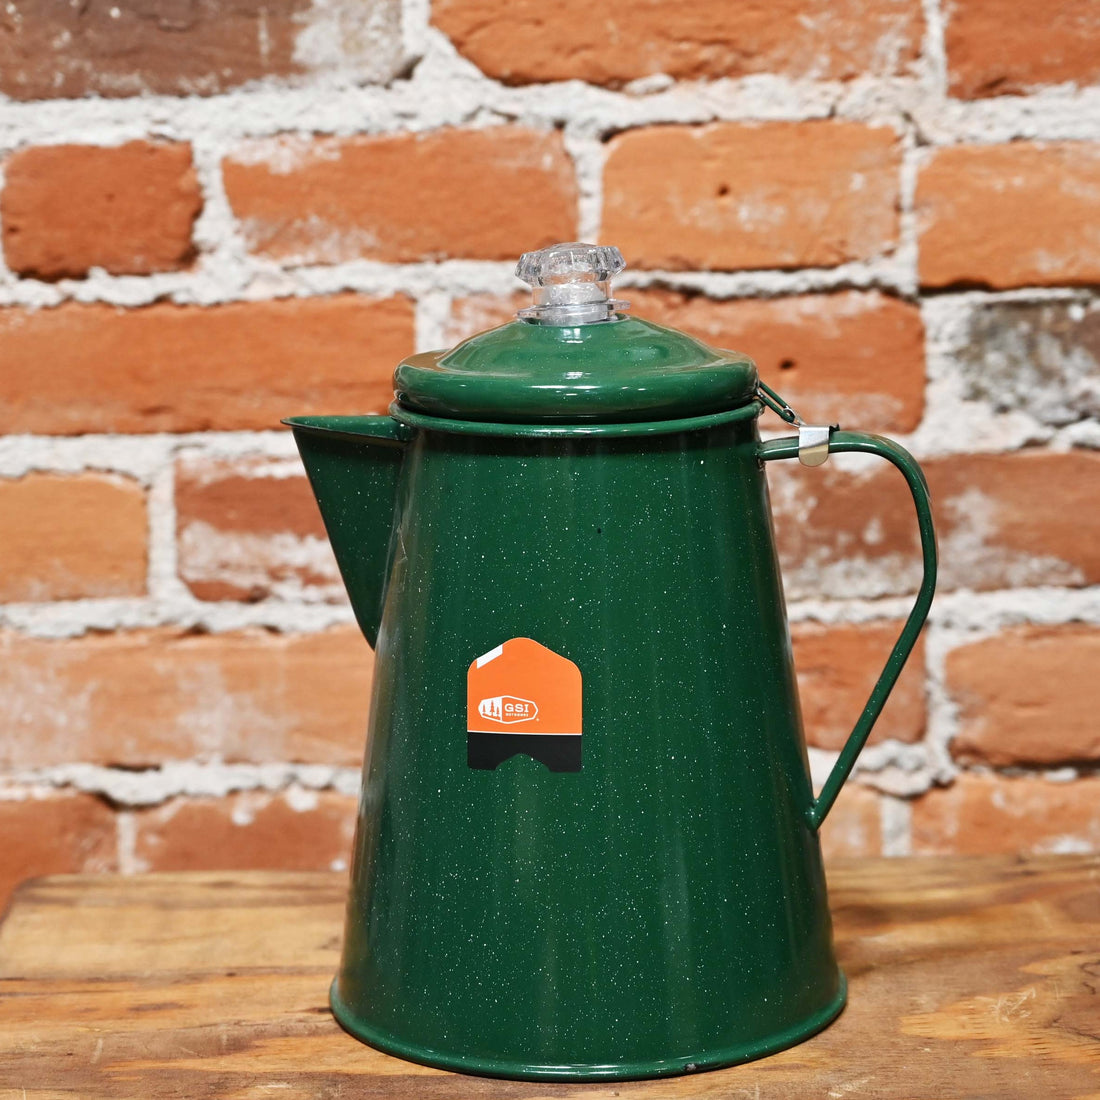 NeosKon Enamelware Coffee Pot (Turquoise Color) - 6 Cups - Camping - Hot  Water for Coffee and Tea - Light and Resistant